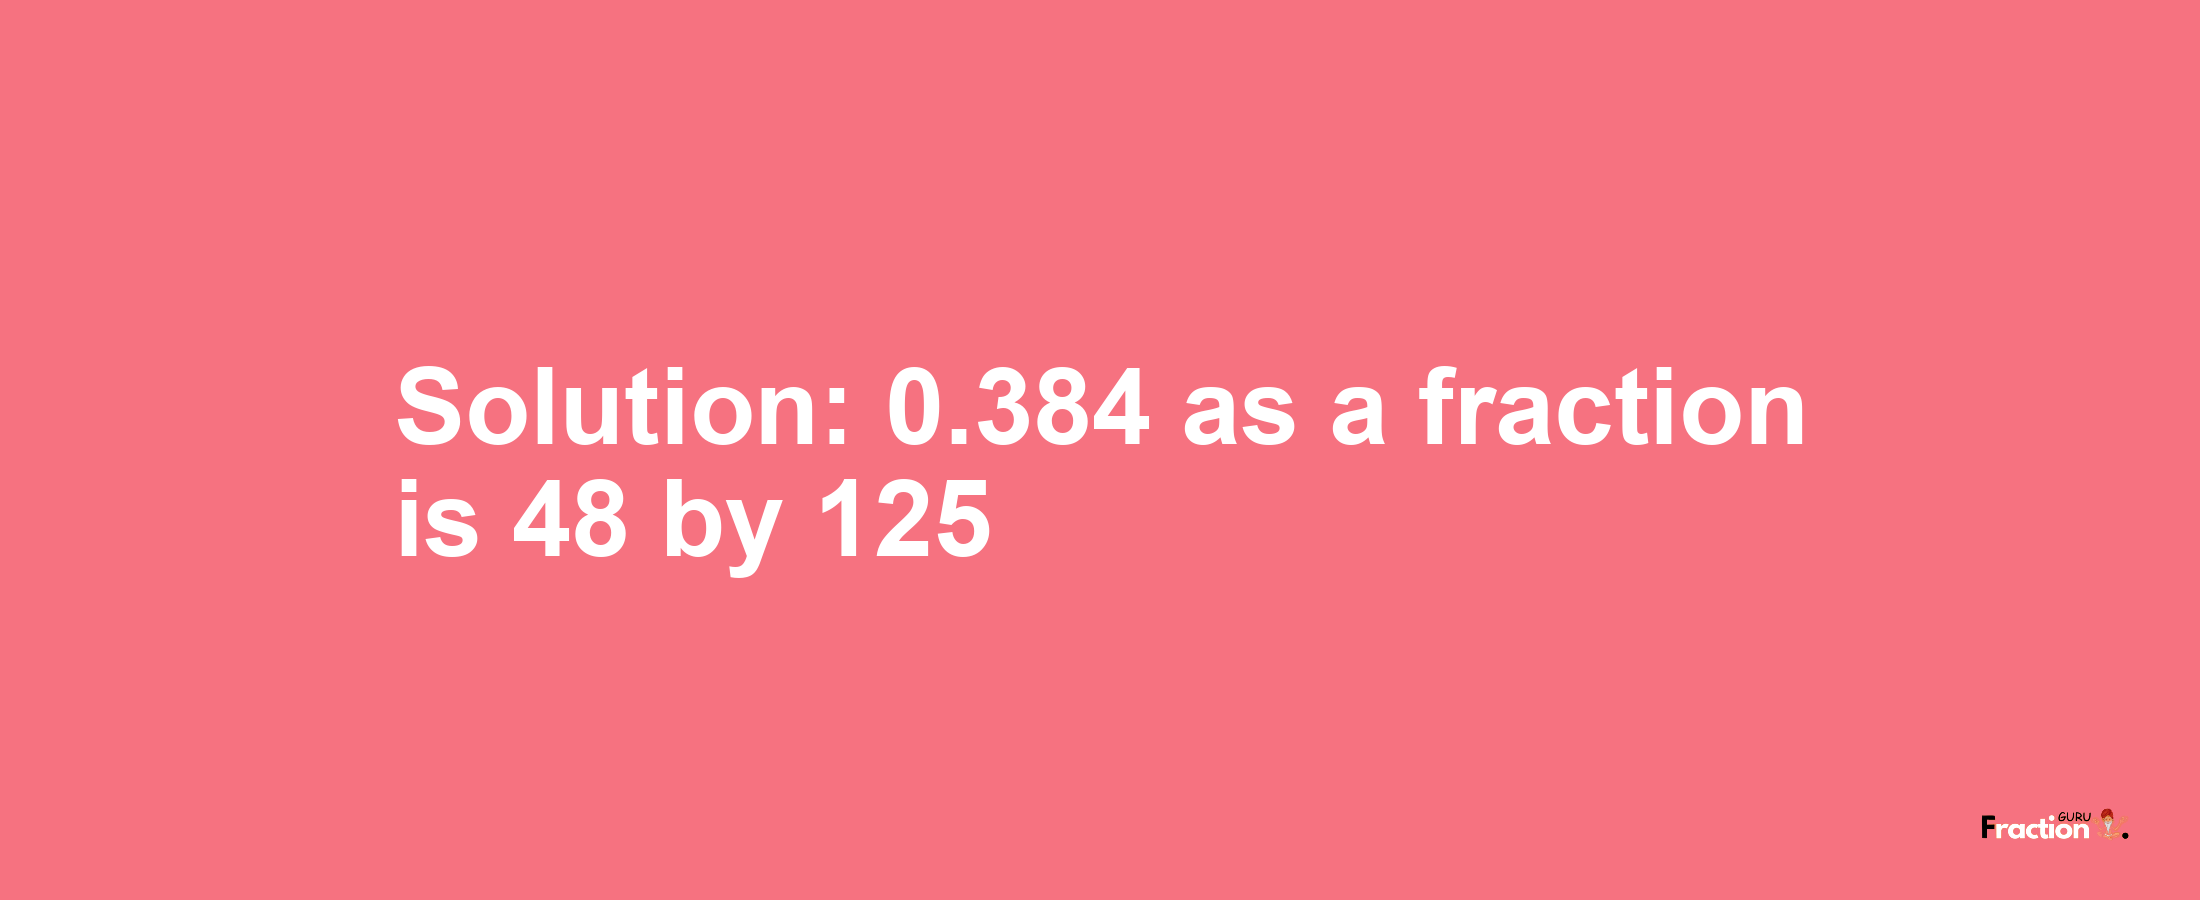 Solution:0.384 as a fraction is 48/125